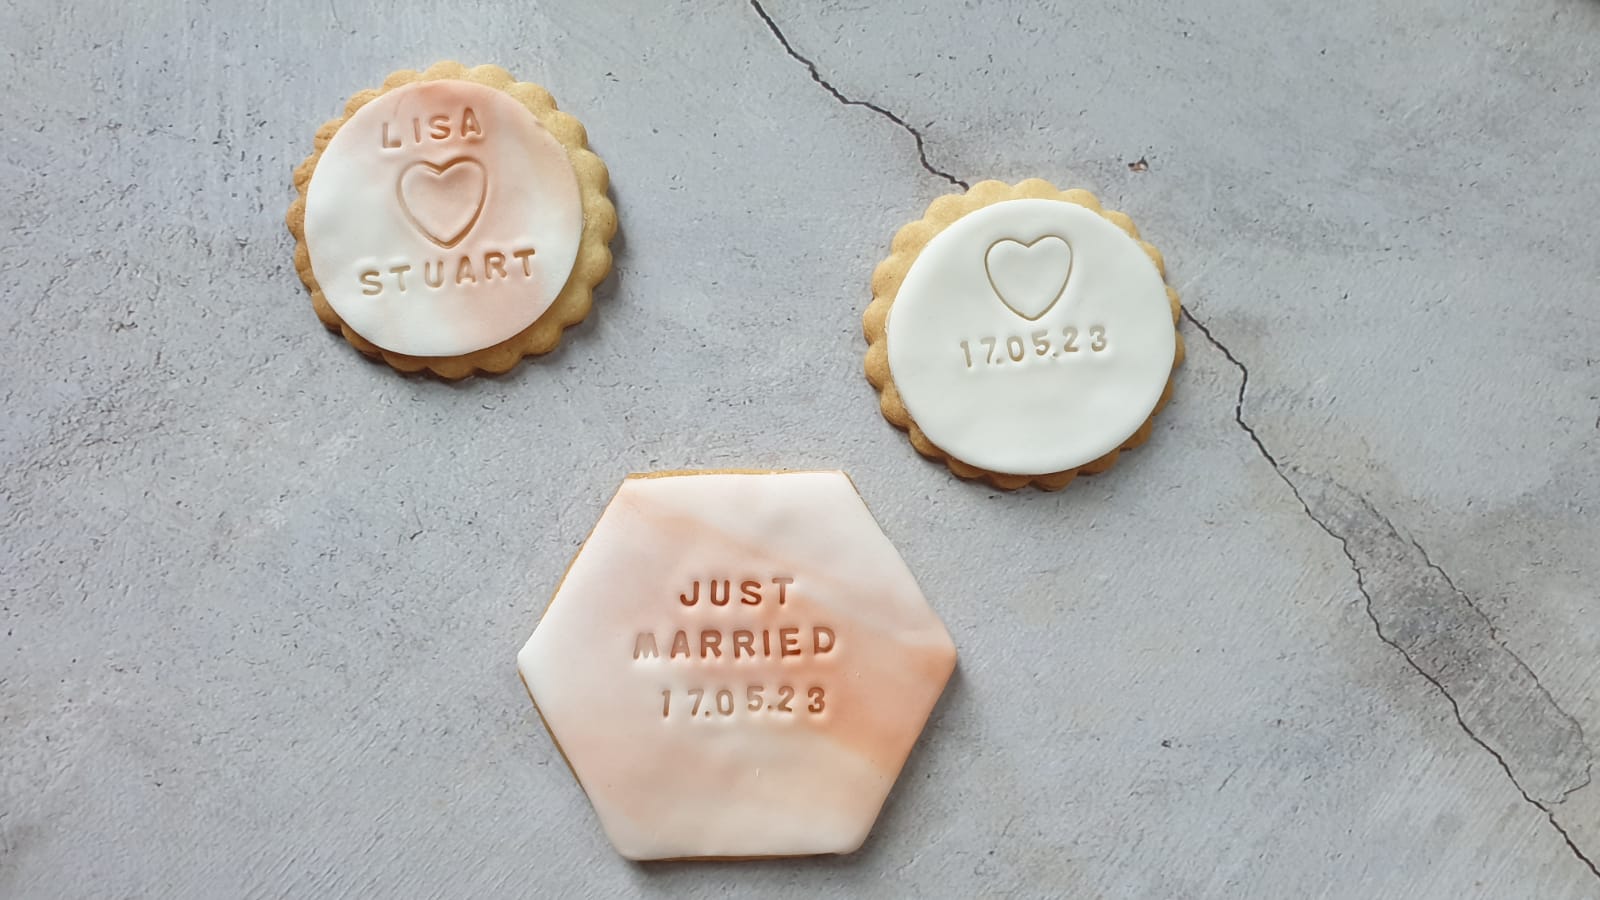 Just married fondant biscuits